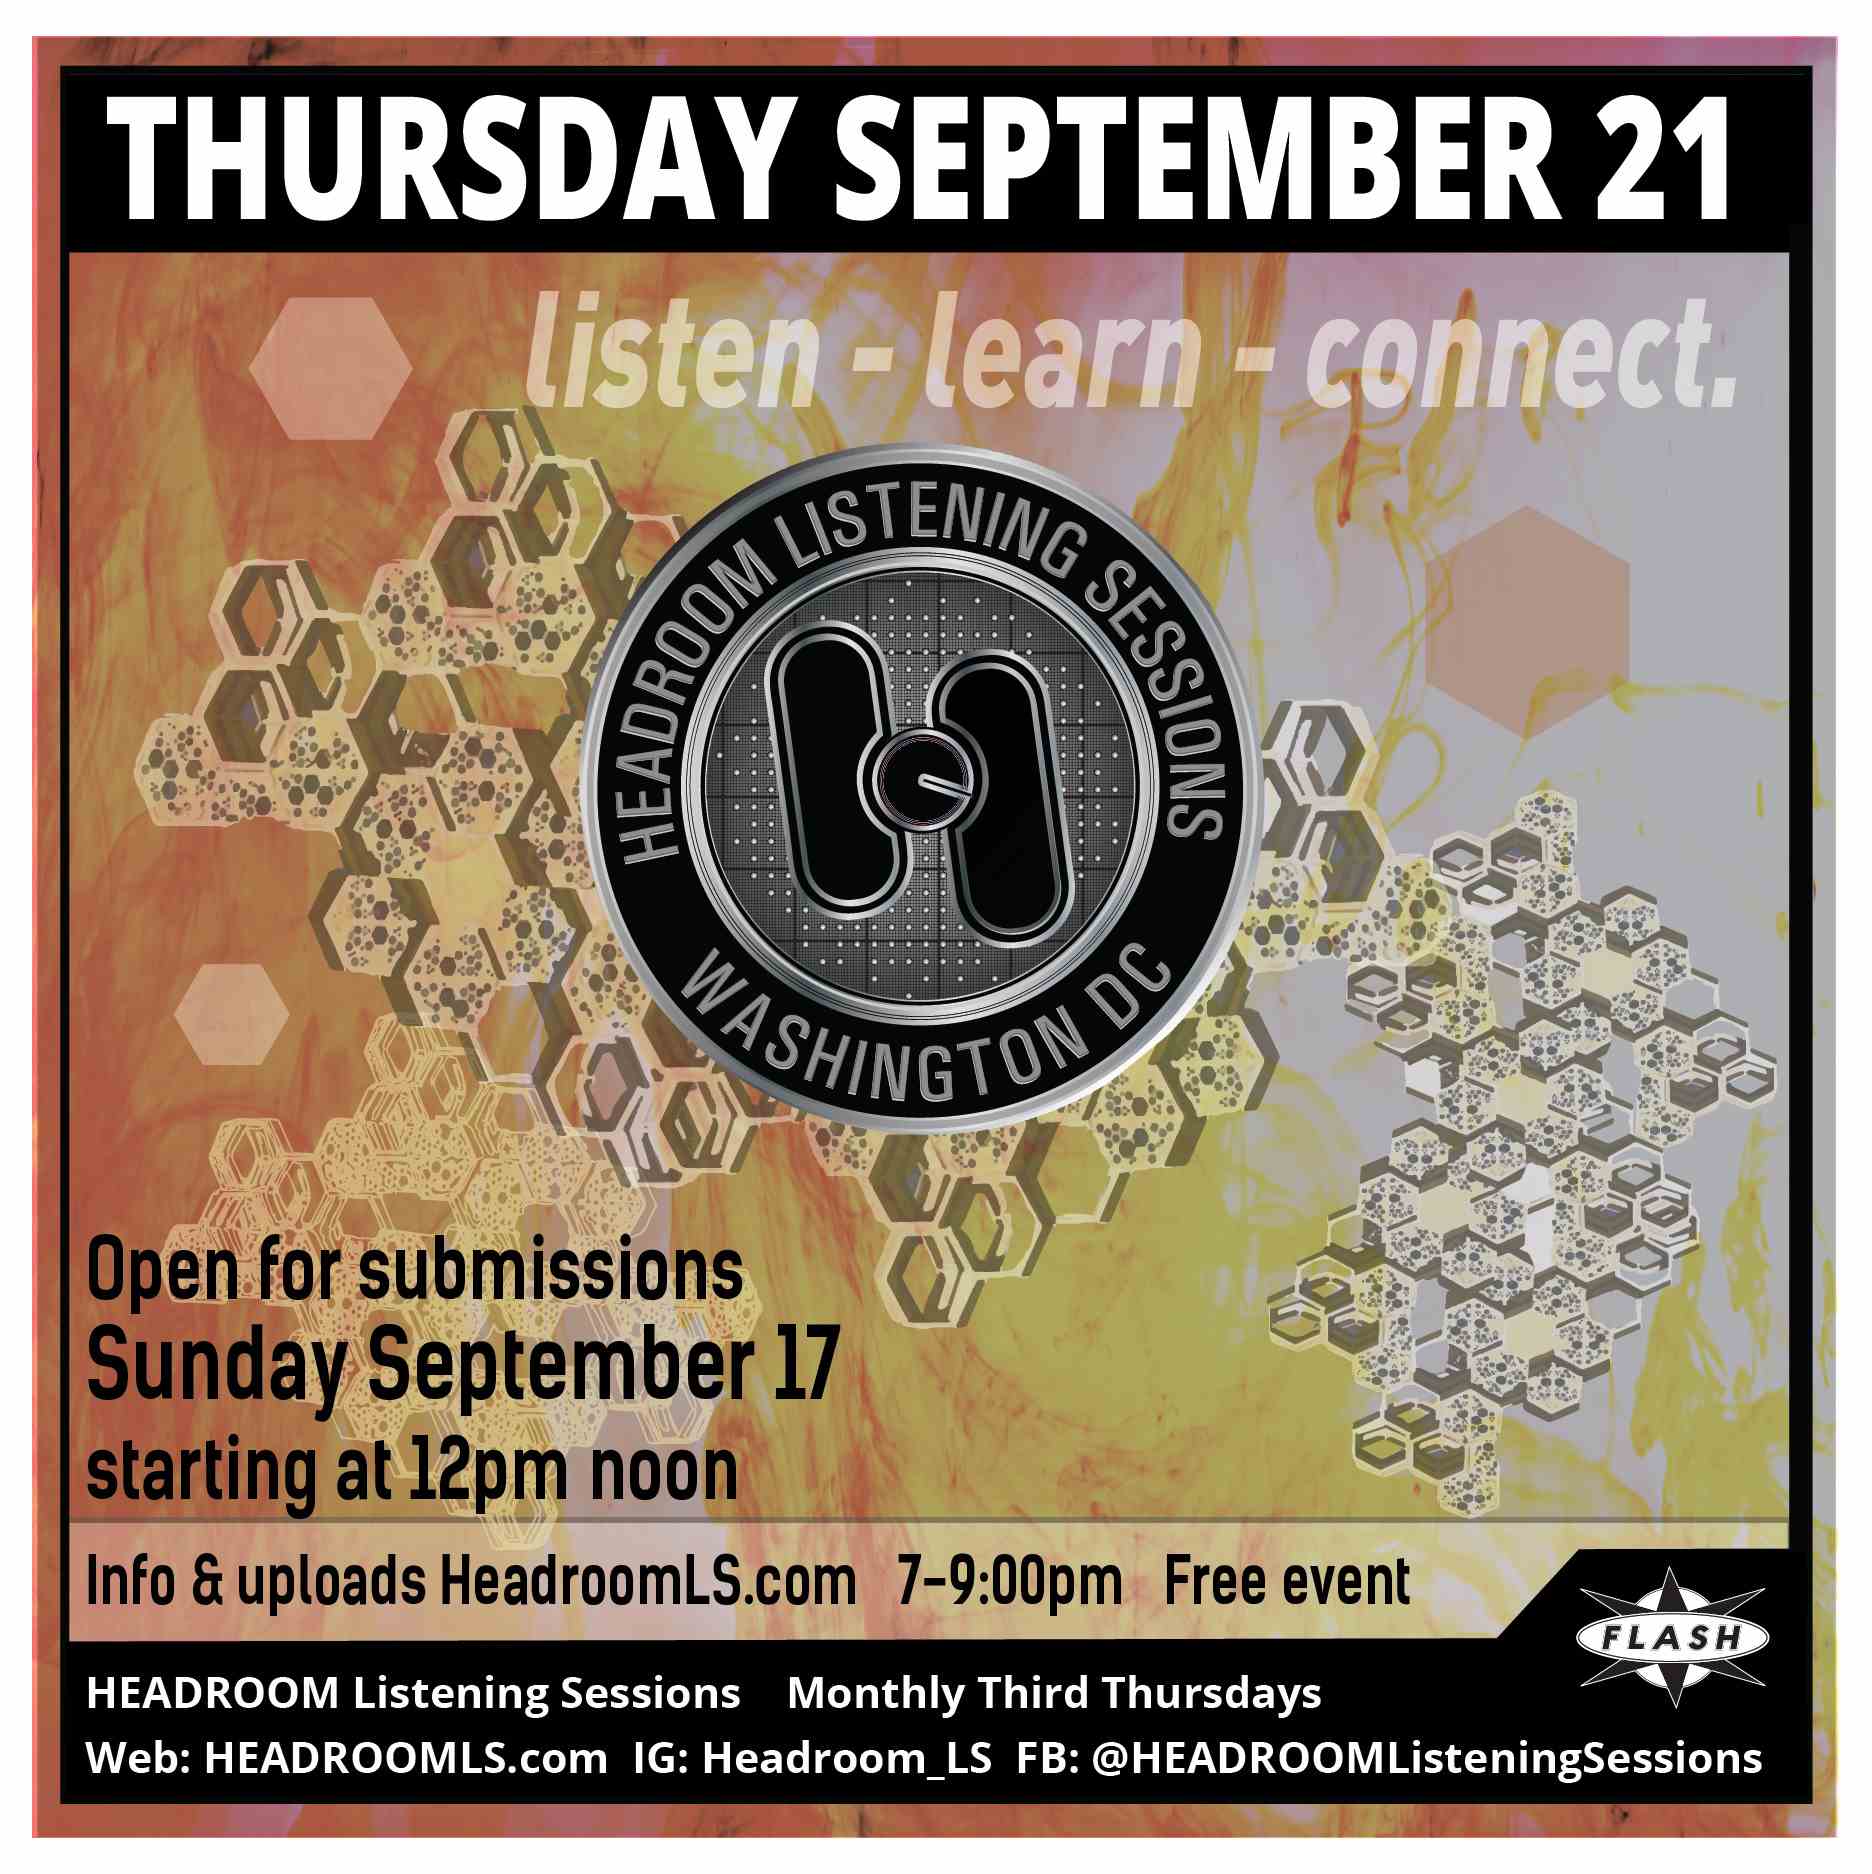 Event image for Headroom Listening Sessions